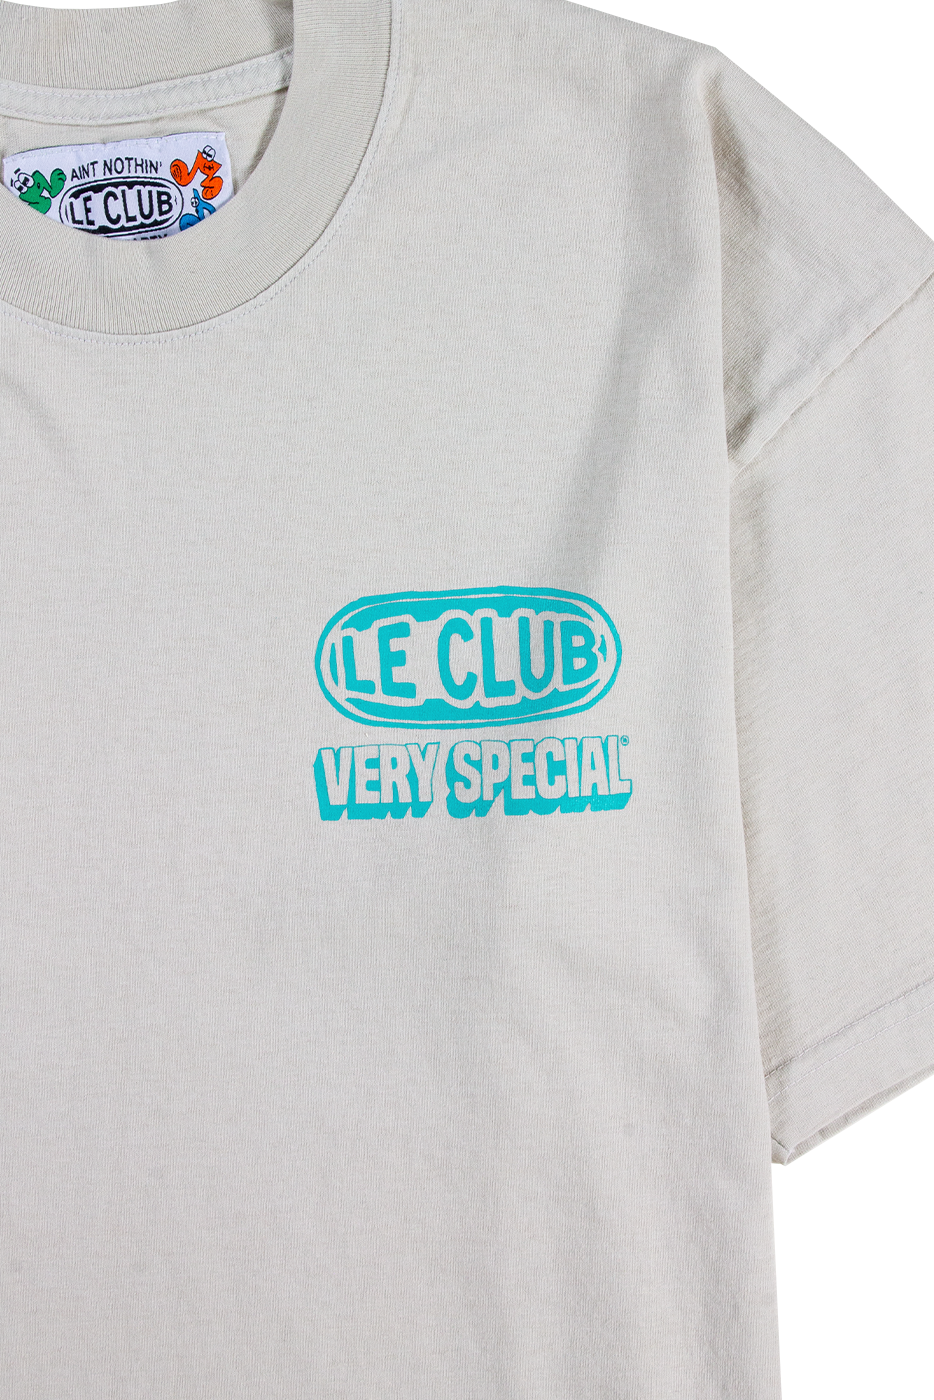 Very Special Friends 01: Le Club